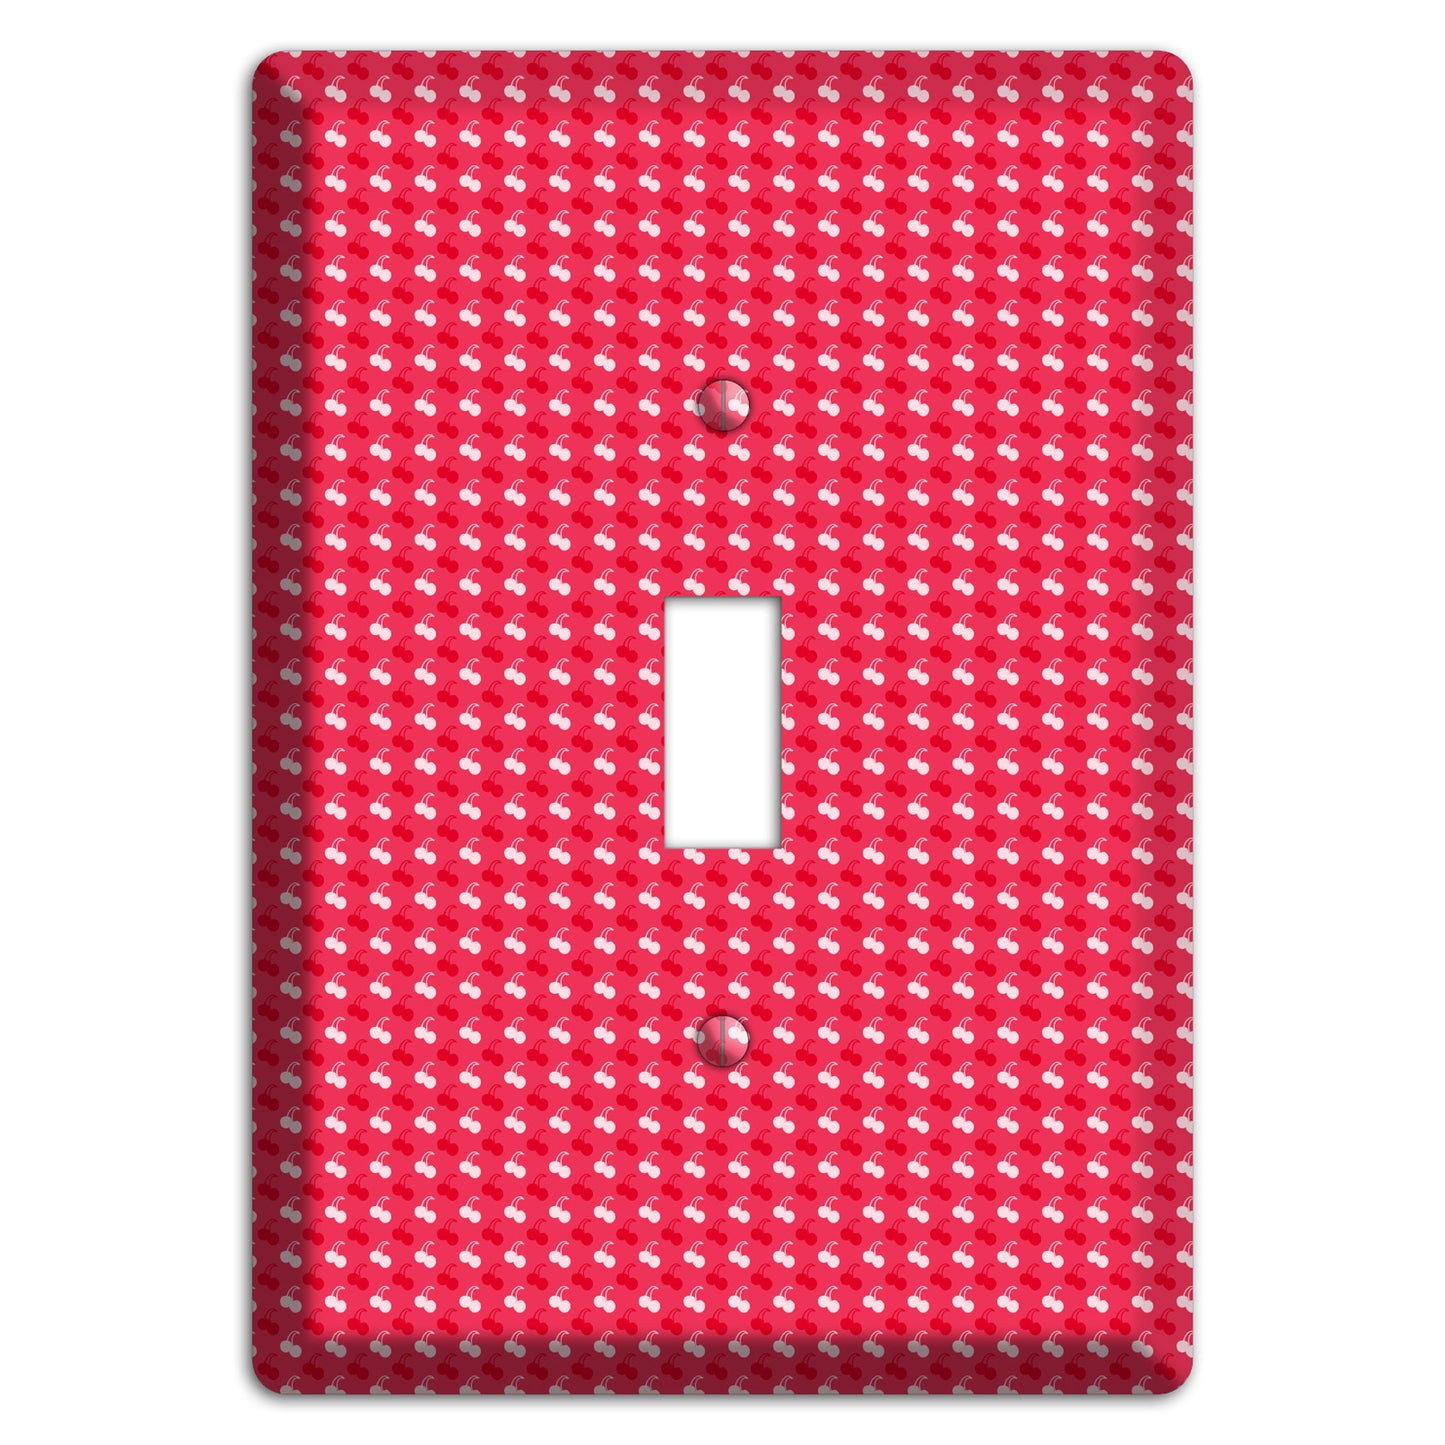 Red with White Motif Cover Plates